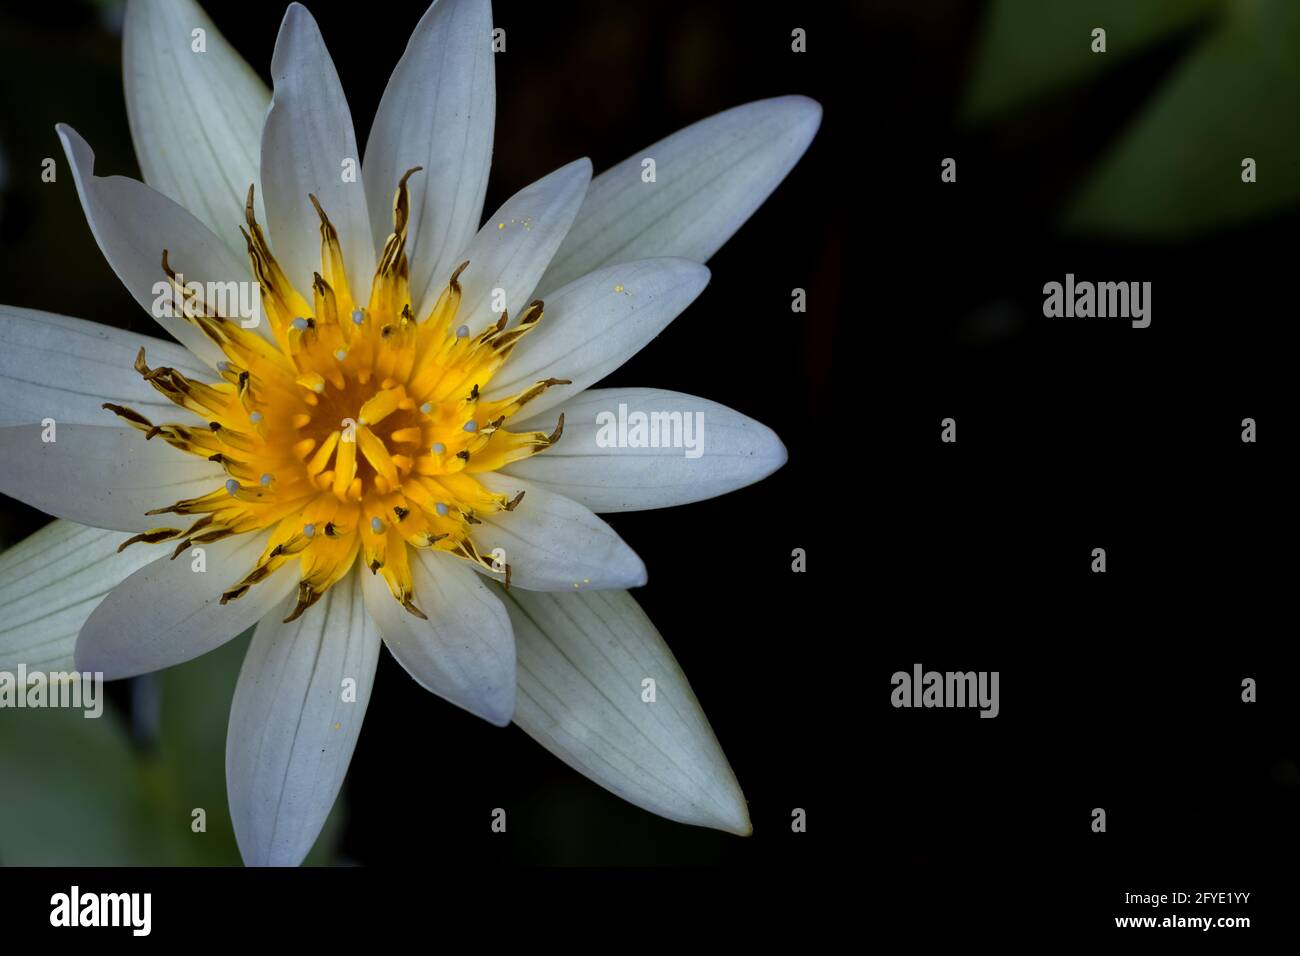 A water lily flower with yellow center and off white petals Stock Photo